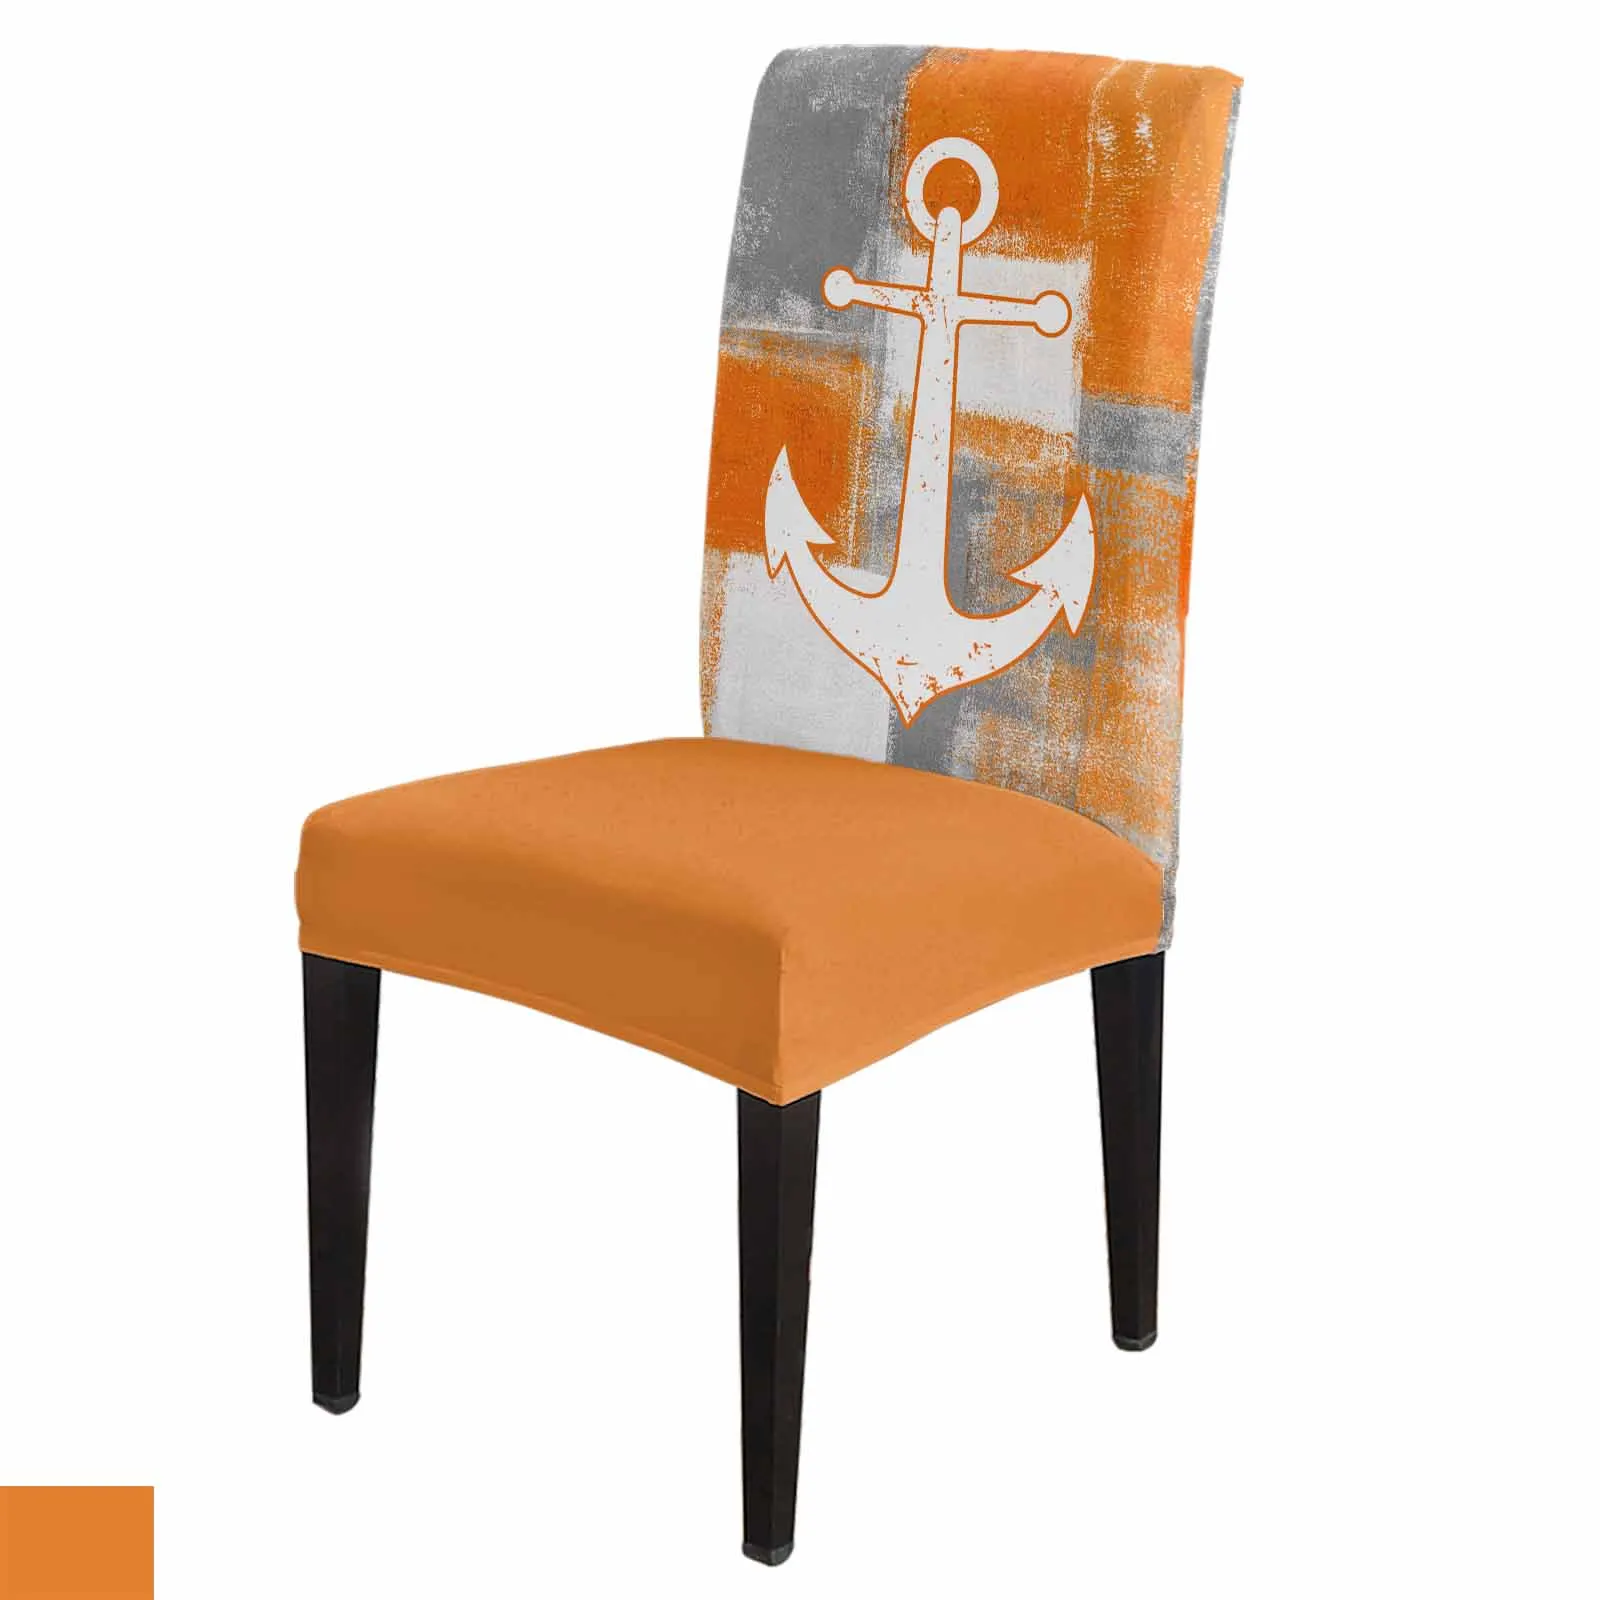 

Retro Abstract Paint Anchor Dining Chair Covers Spandex Stretch Seat Cover for Wedding Kitchen Banquet Party Seat Case